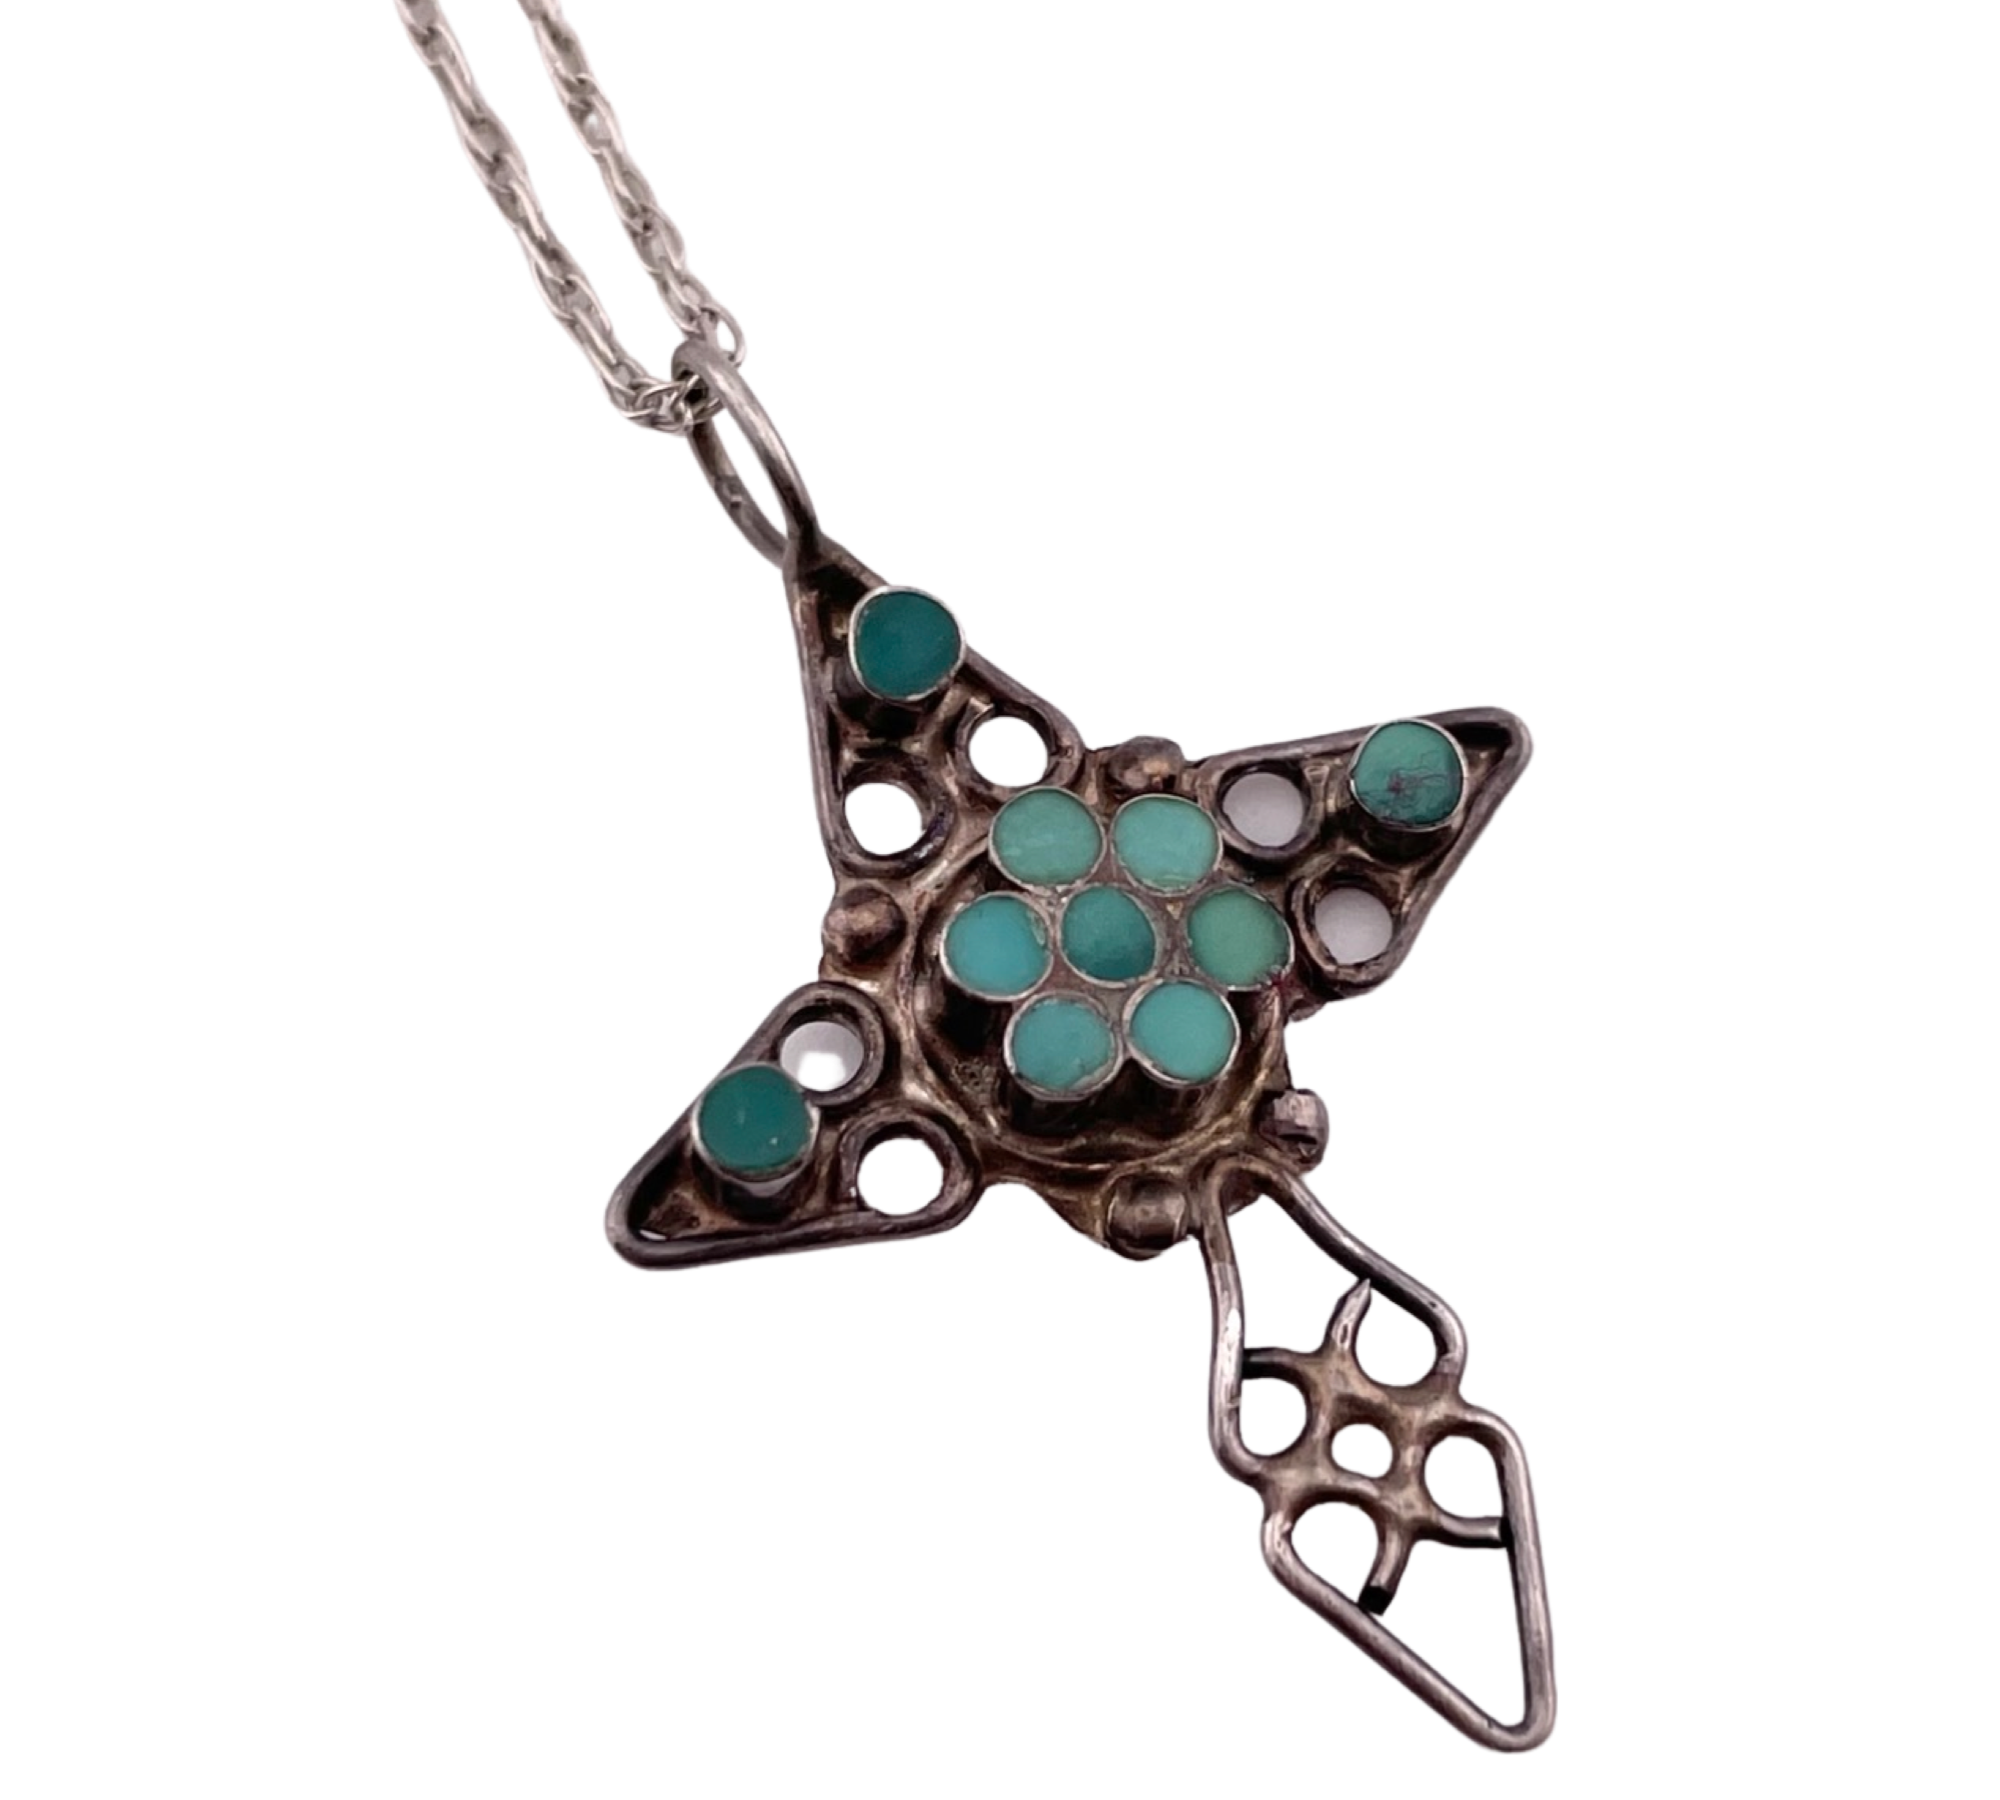 sterling silver Dishta style turquoise inlay cross pendant necklace